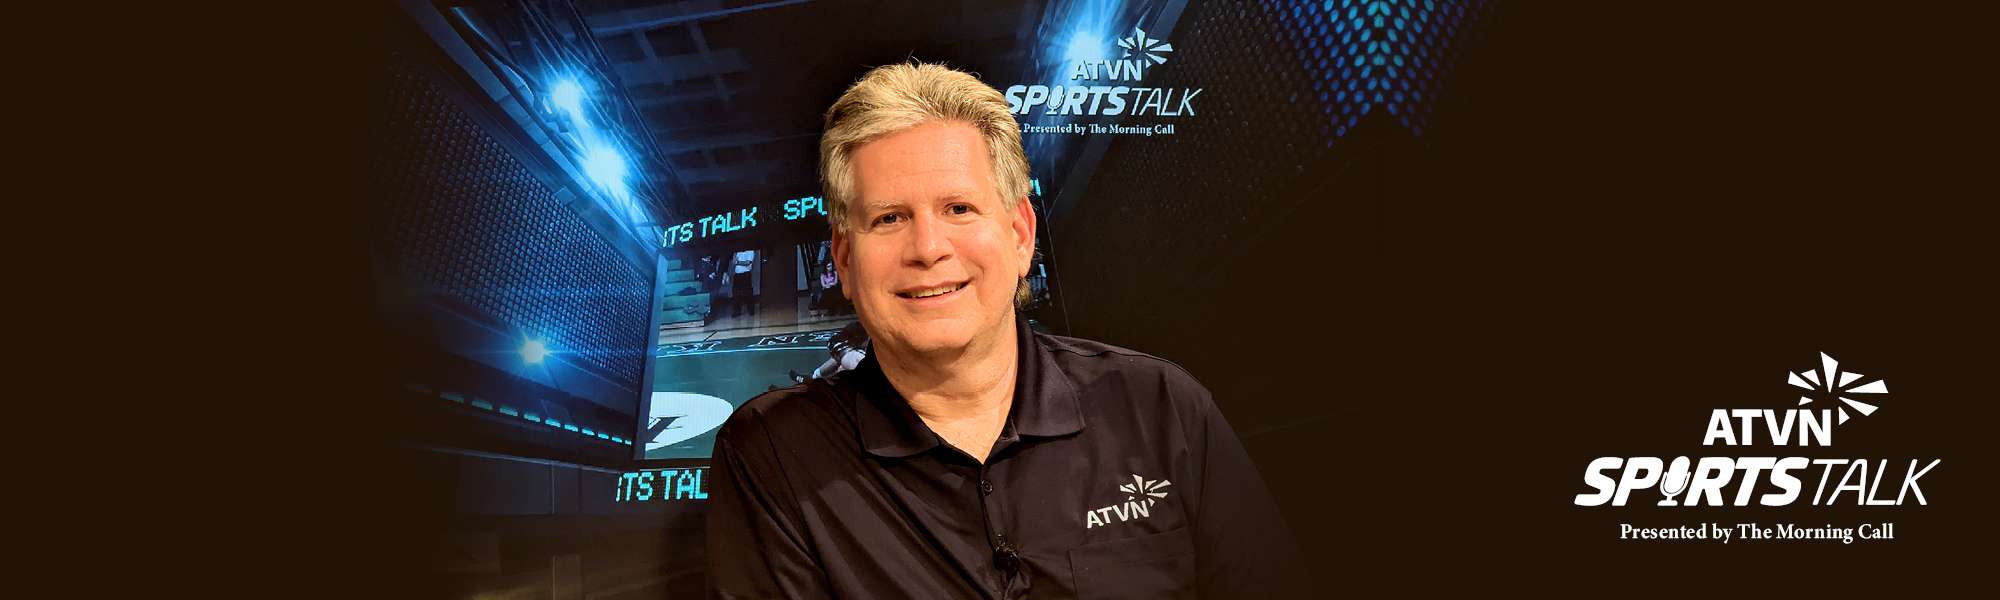 ATVN sports talk presented by the morning call